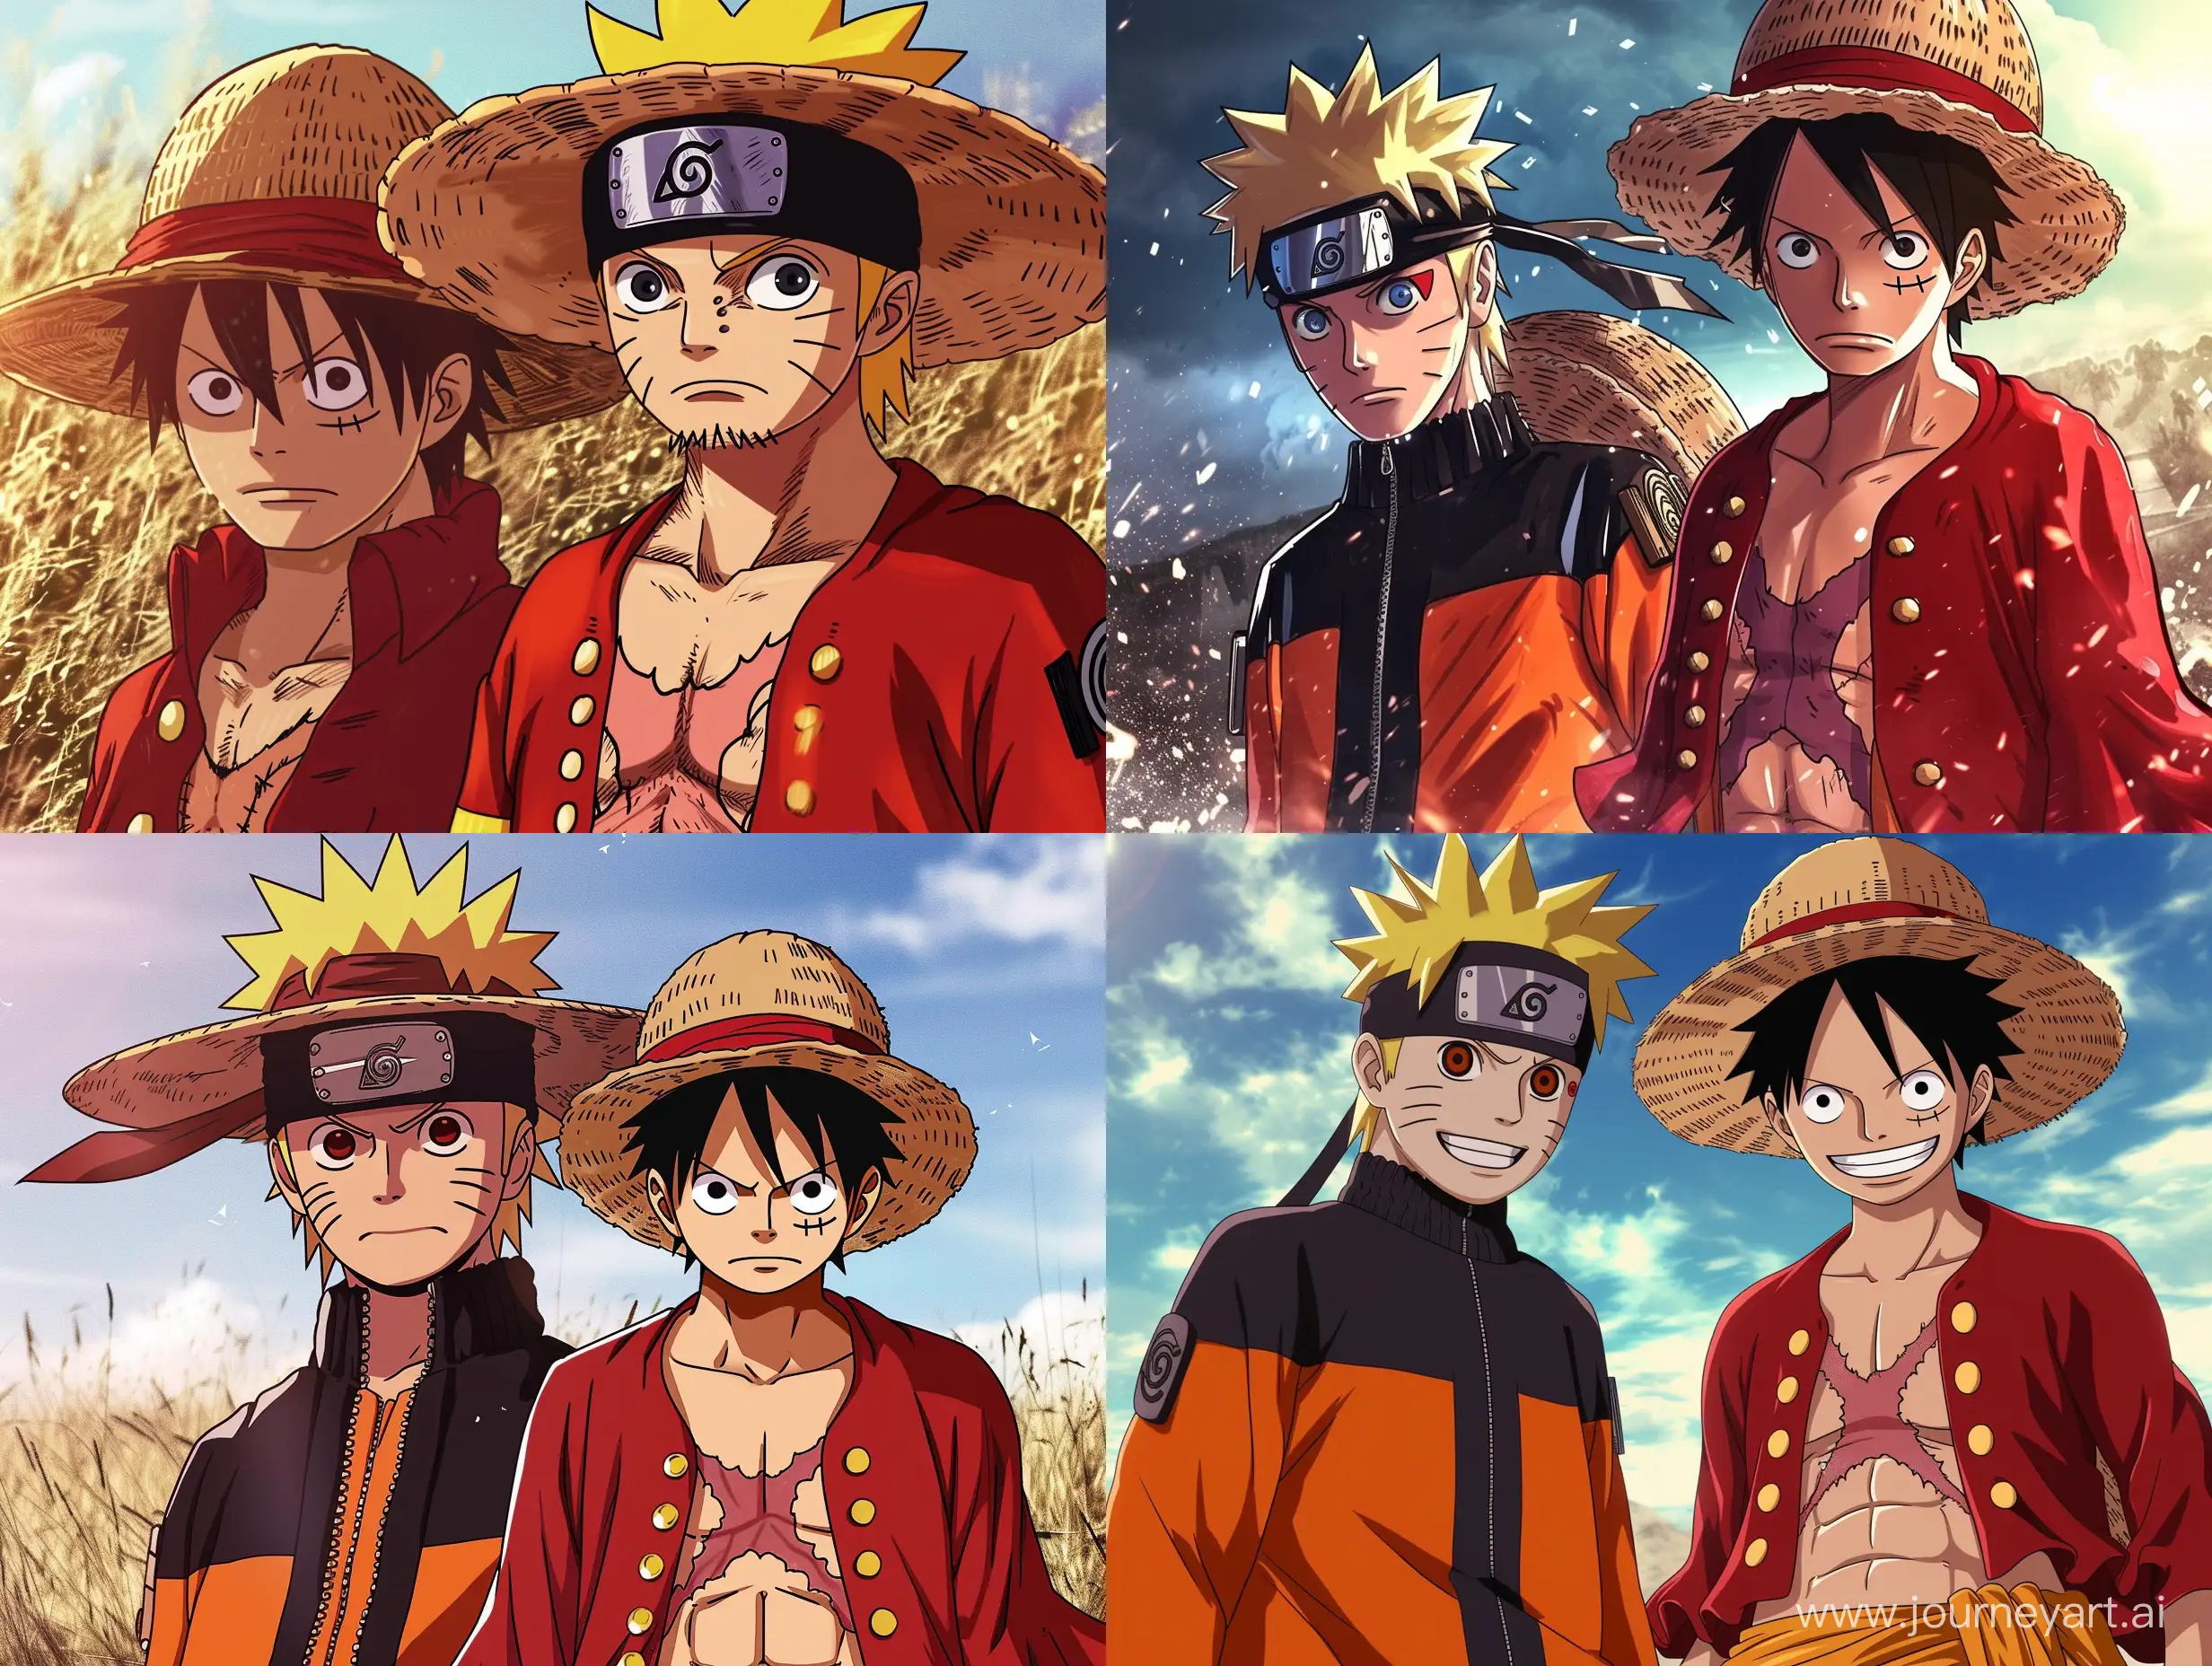 Combine Naruto with Monkey D. Luffy